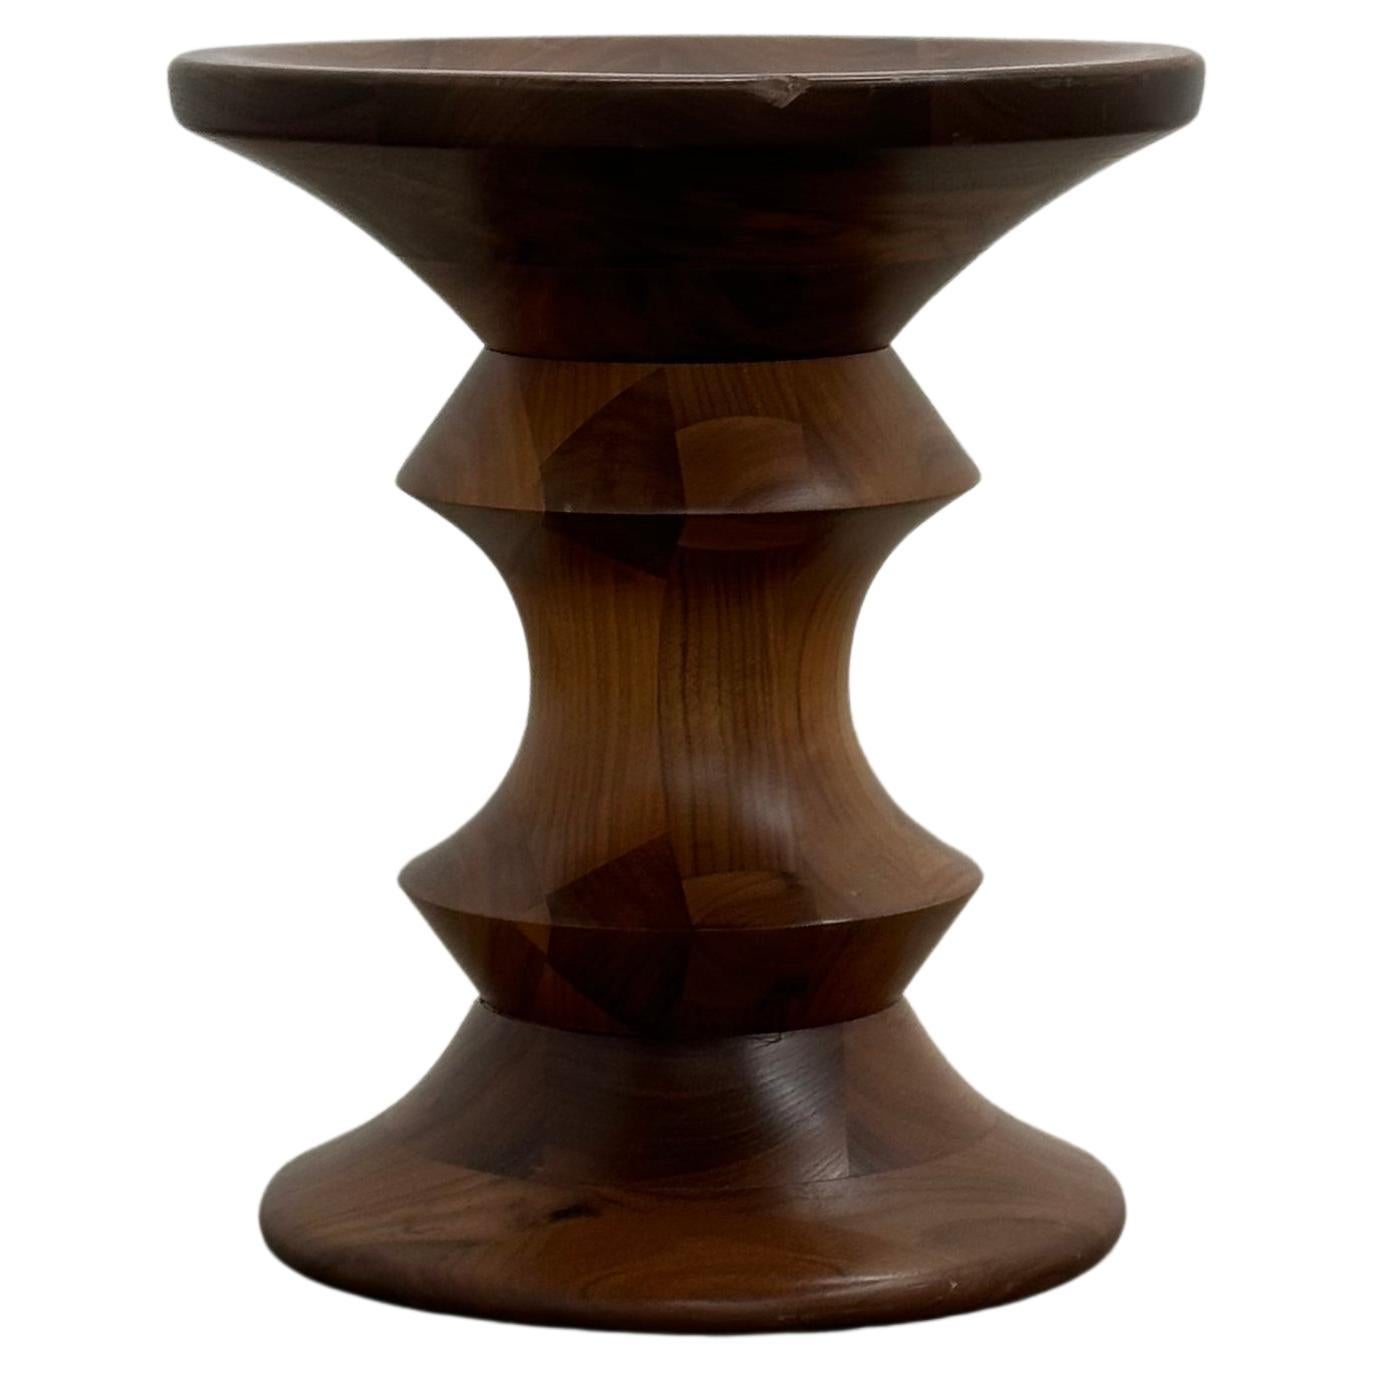 Charles and Ray Eames for Herman Miller Walnut Time Life Stool Model A